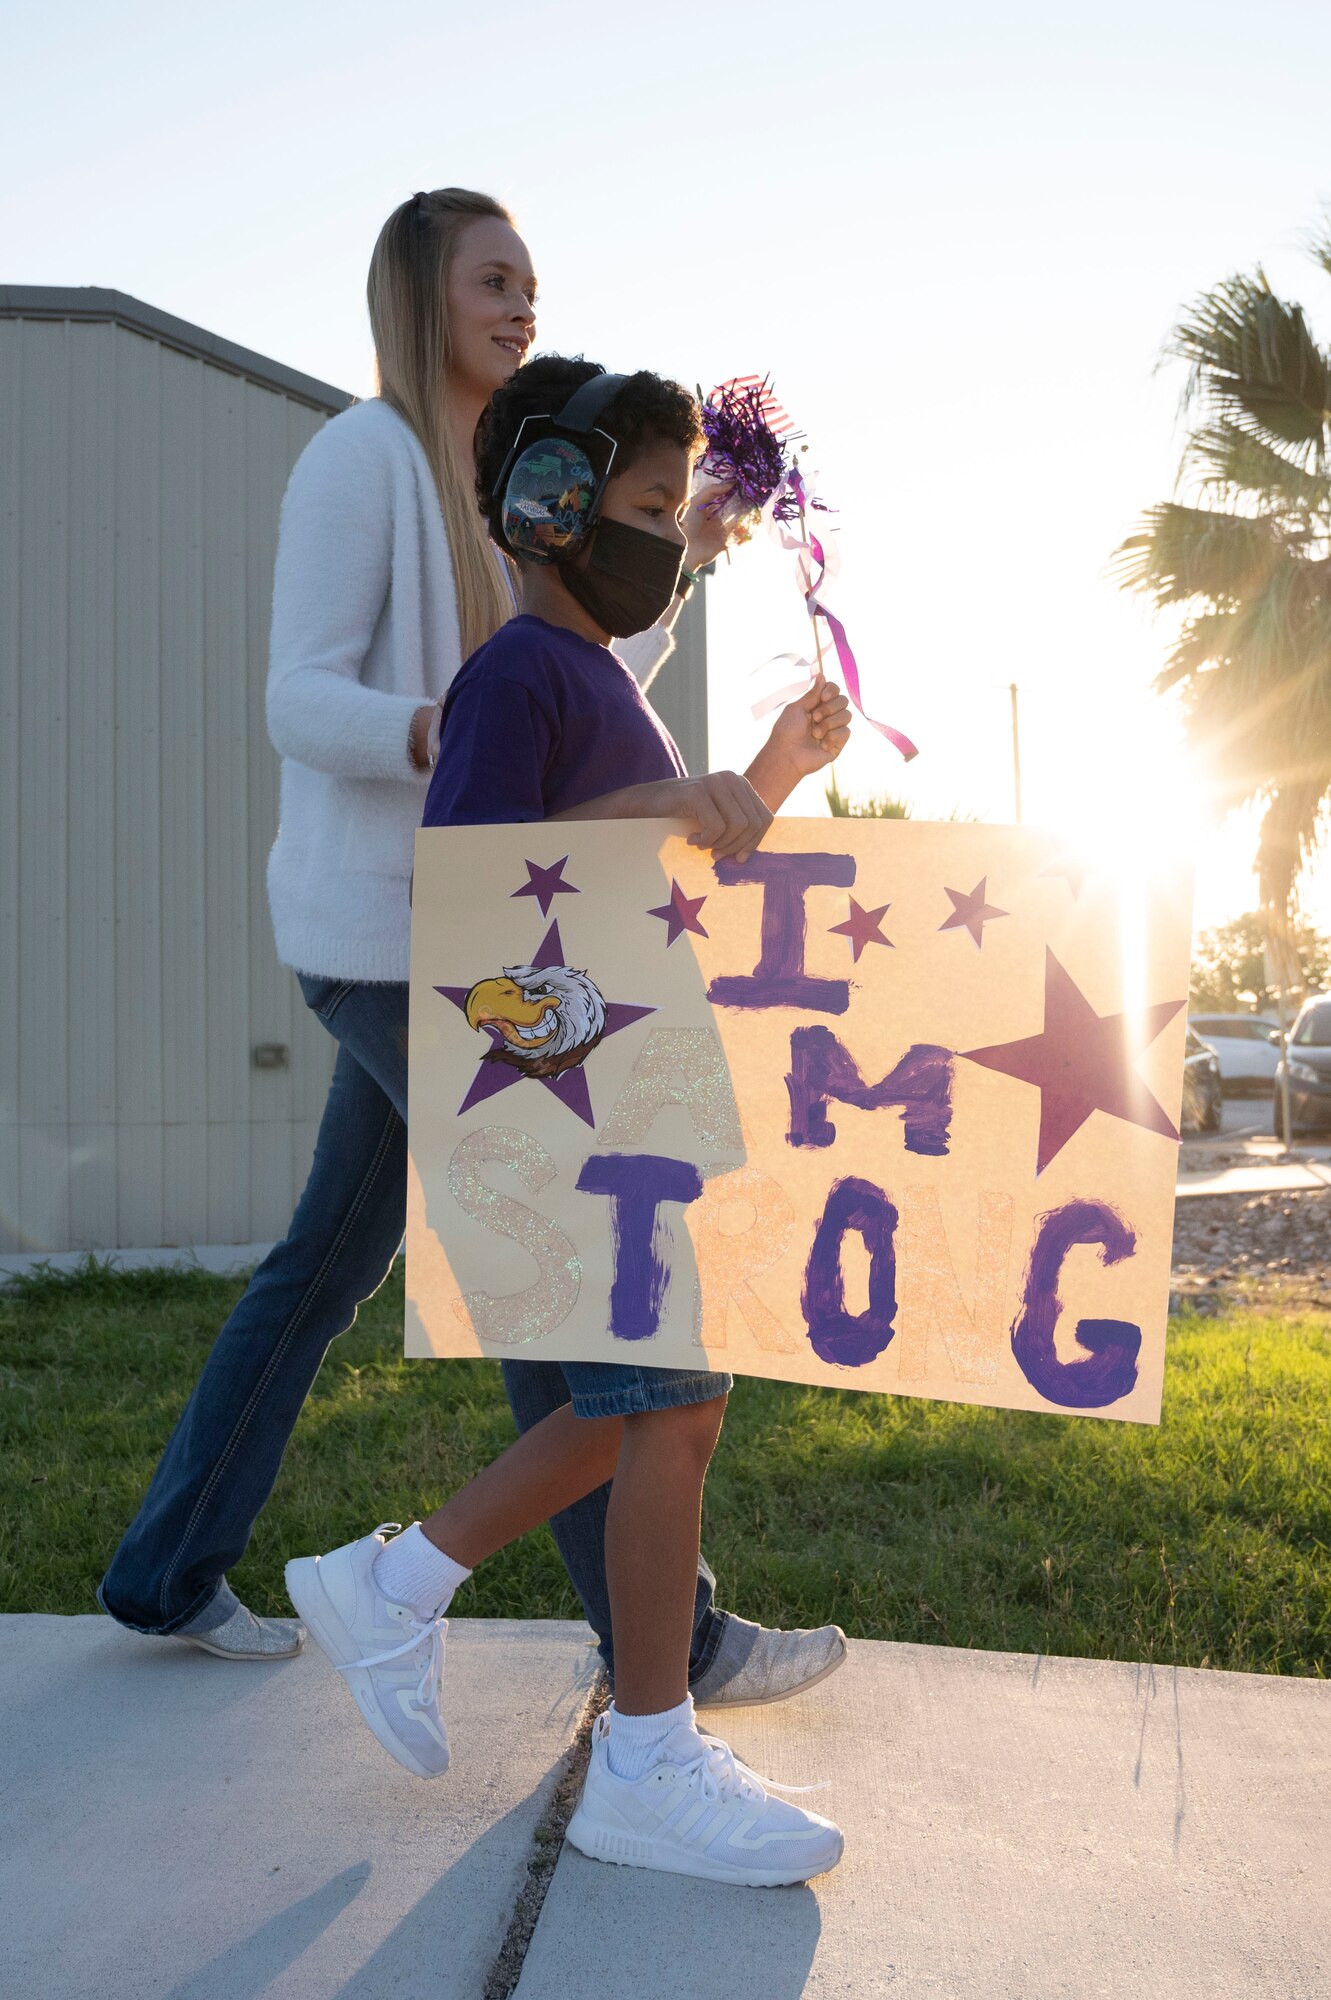 A student from the Roberto Bobby Barrera (RBB) Elementary School holds up a sign during the “Purple Parade” held at Laughlin Air Force Base, Texas, Sept. 29, 2022. The “Purple Parade” was held in celebration of RBB Elementary School receiving the Purple Star Award, recognizing the support and commitment the school provides to meeting the unique needs of military-connected students and their families. (U.S. Air Force photo by Airman 1st Class Kailee Reynolds)